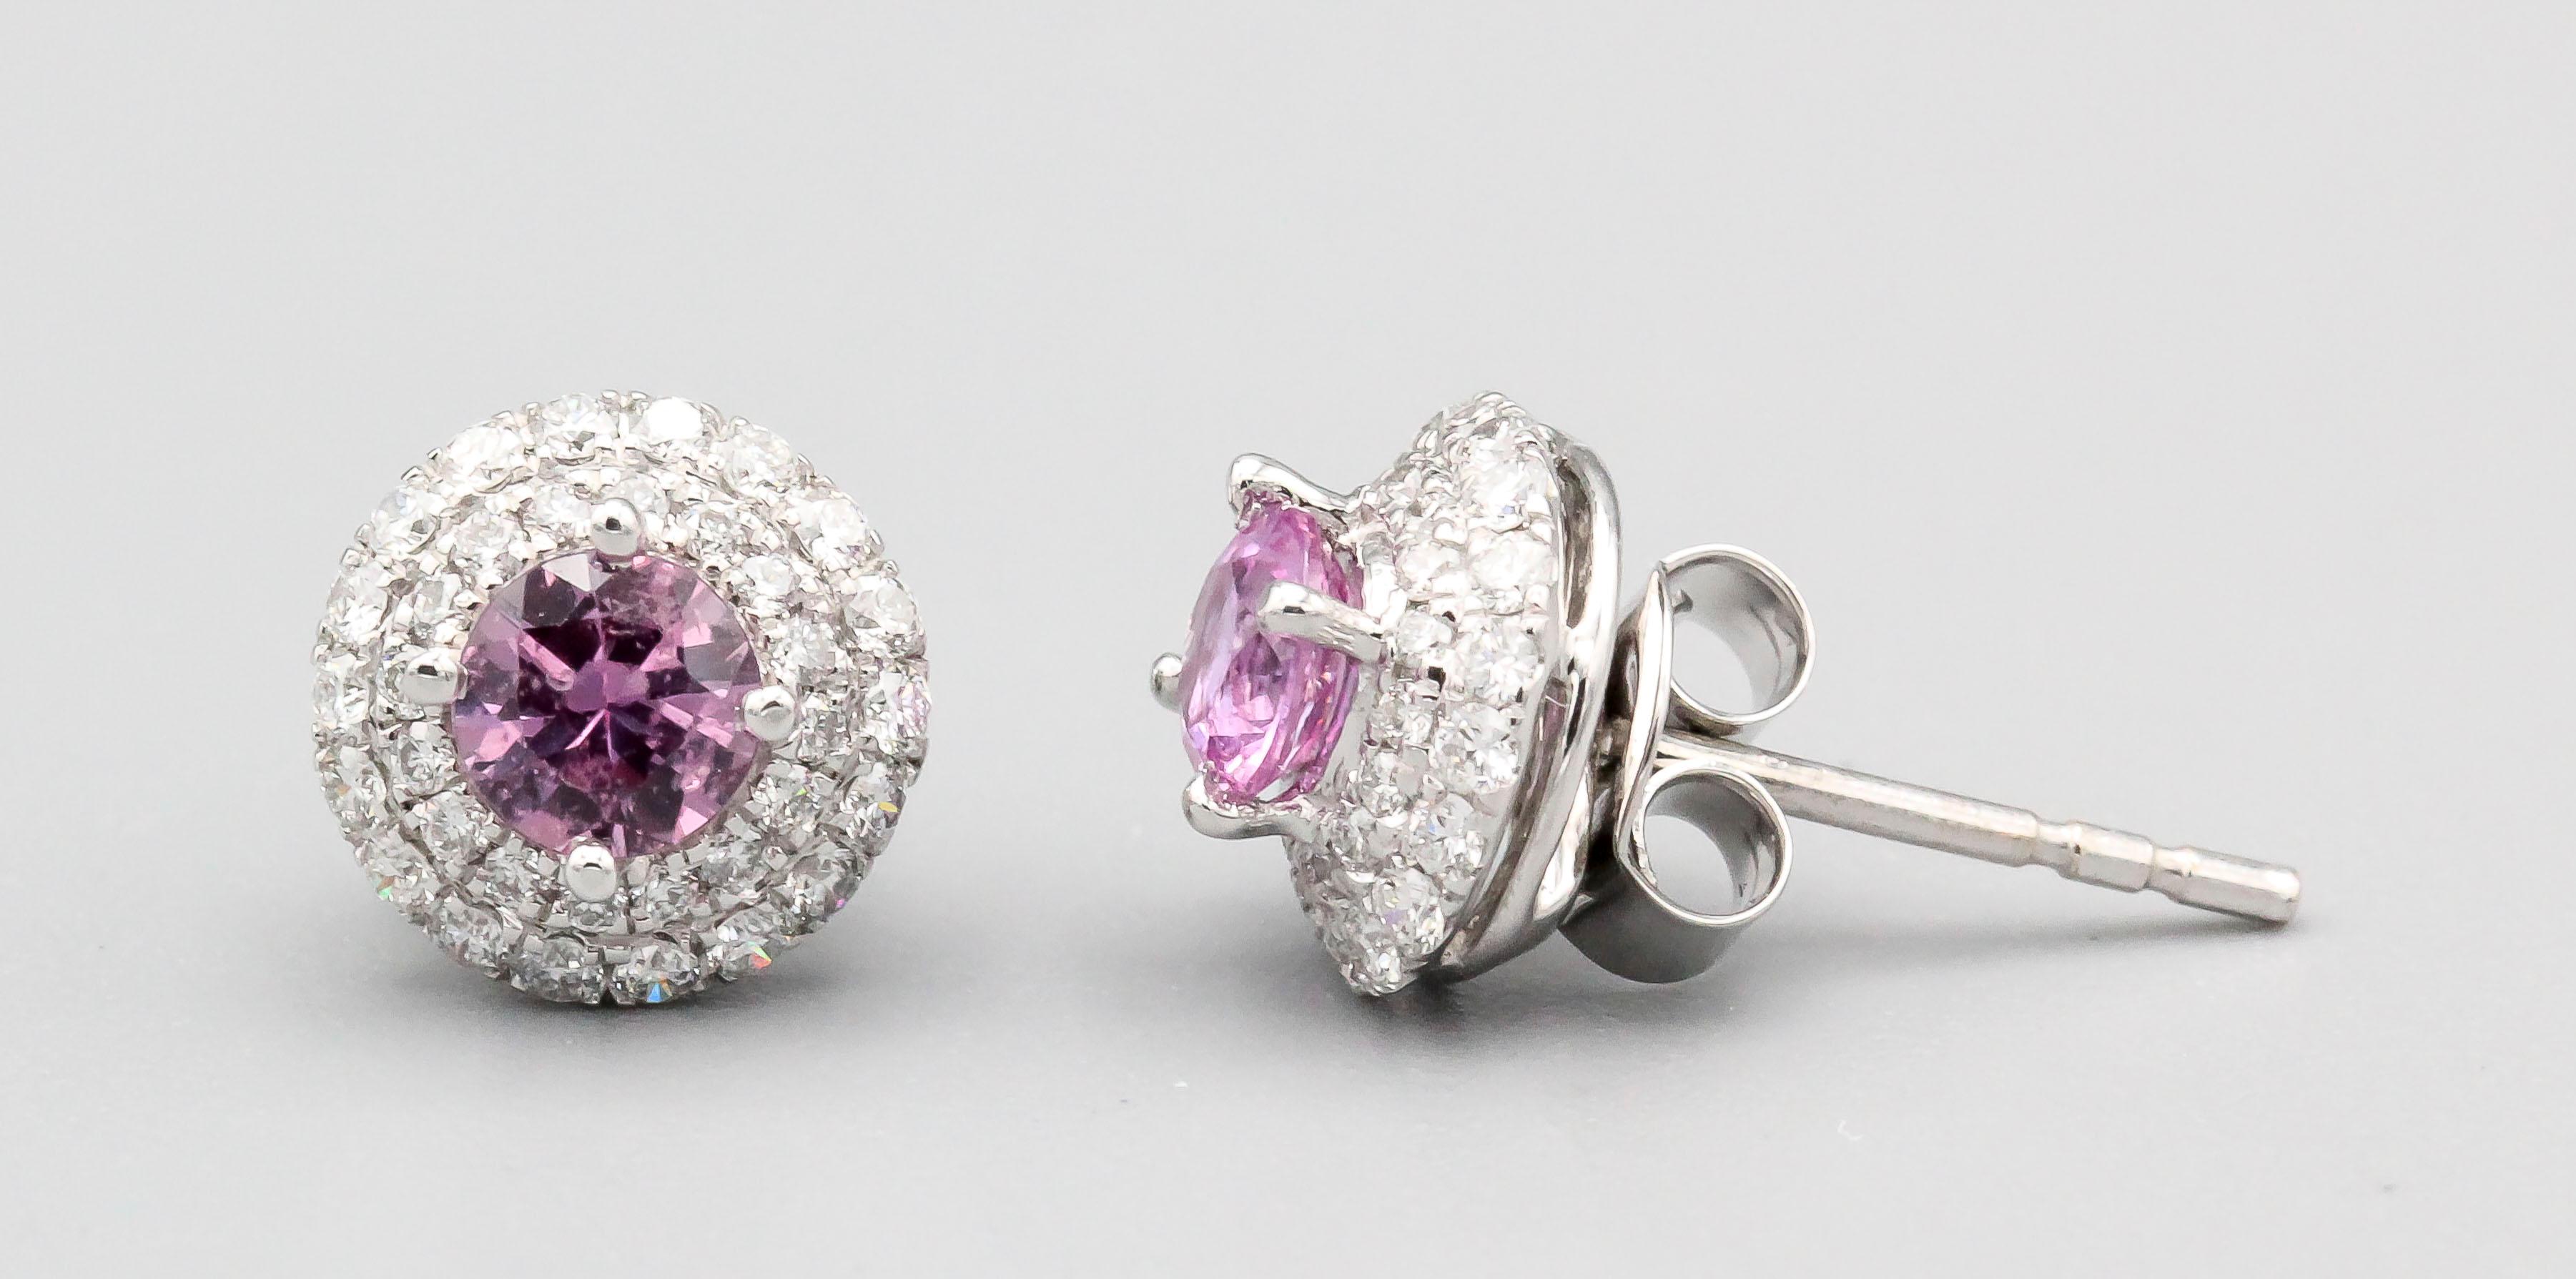 Fine pair of pink sapphire and diamond earrings set in 18k white gold, by Tresorra. They feature high grade round brilliant cut diamonds of approx. .5 carats and .85 carats of vibrant pink sapphires. Expert workmanship and easy to wear.  Retail